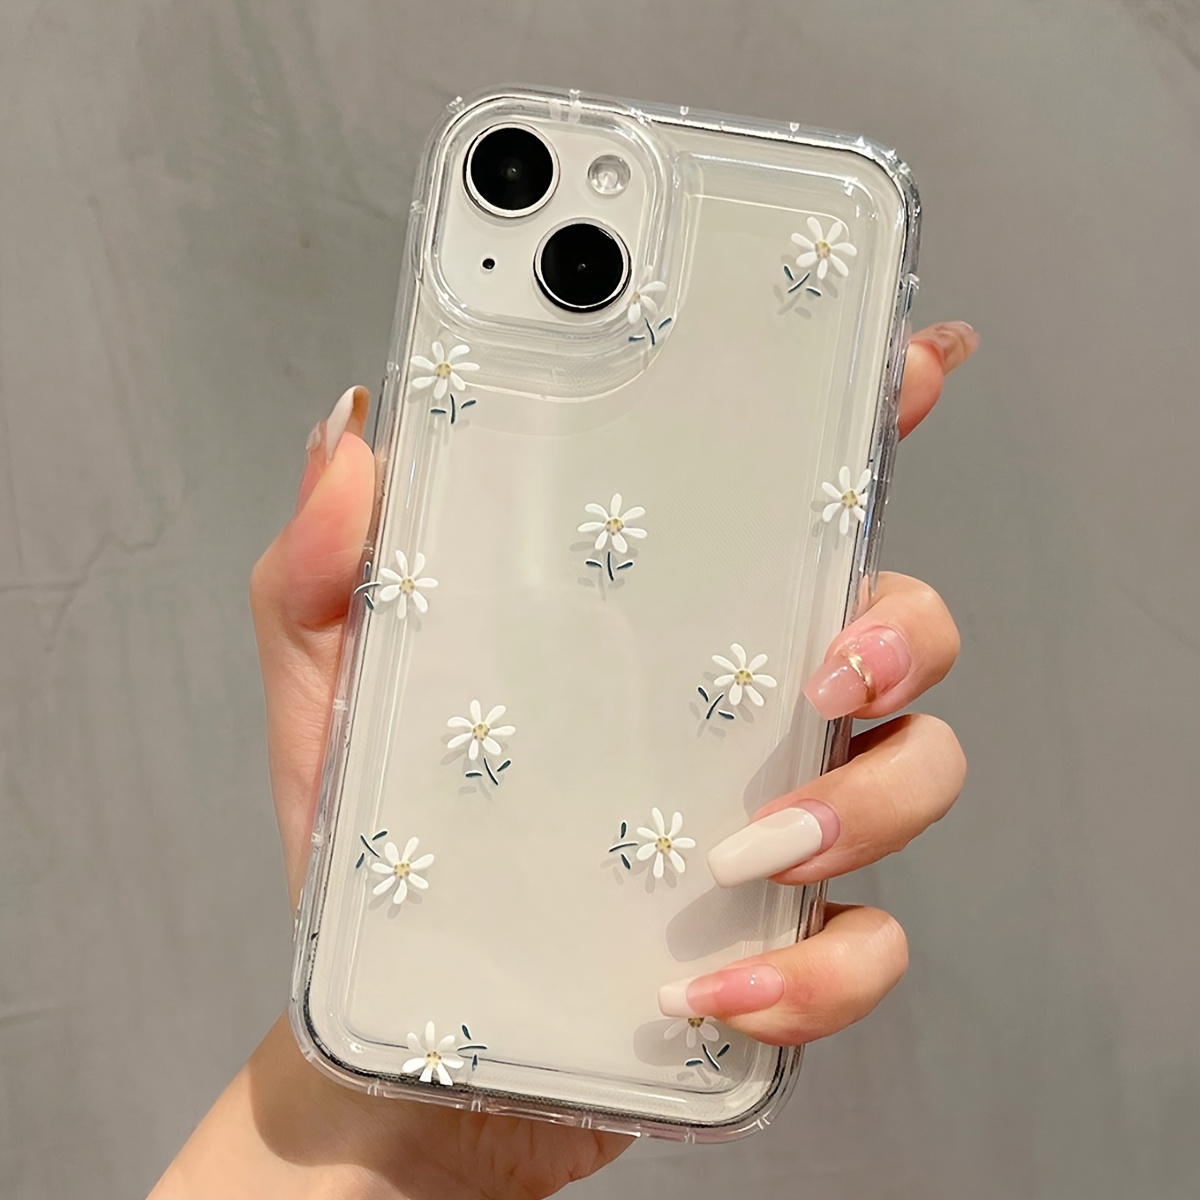 

Trendy Daisy Pattern Clear Tpu Phone Case For 15, 14, 13, 12, 11, Pro Max, Xs, Xr, 8, 7 Plus